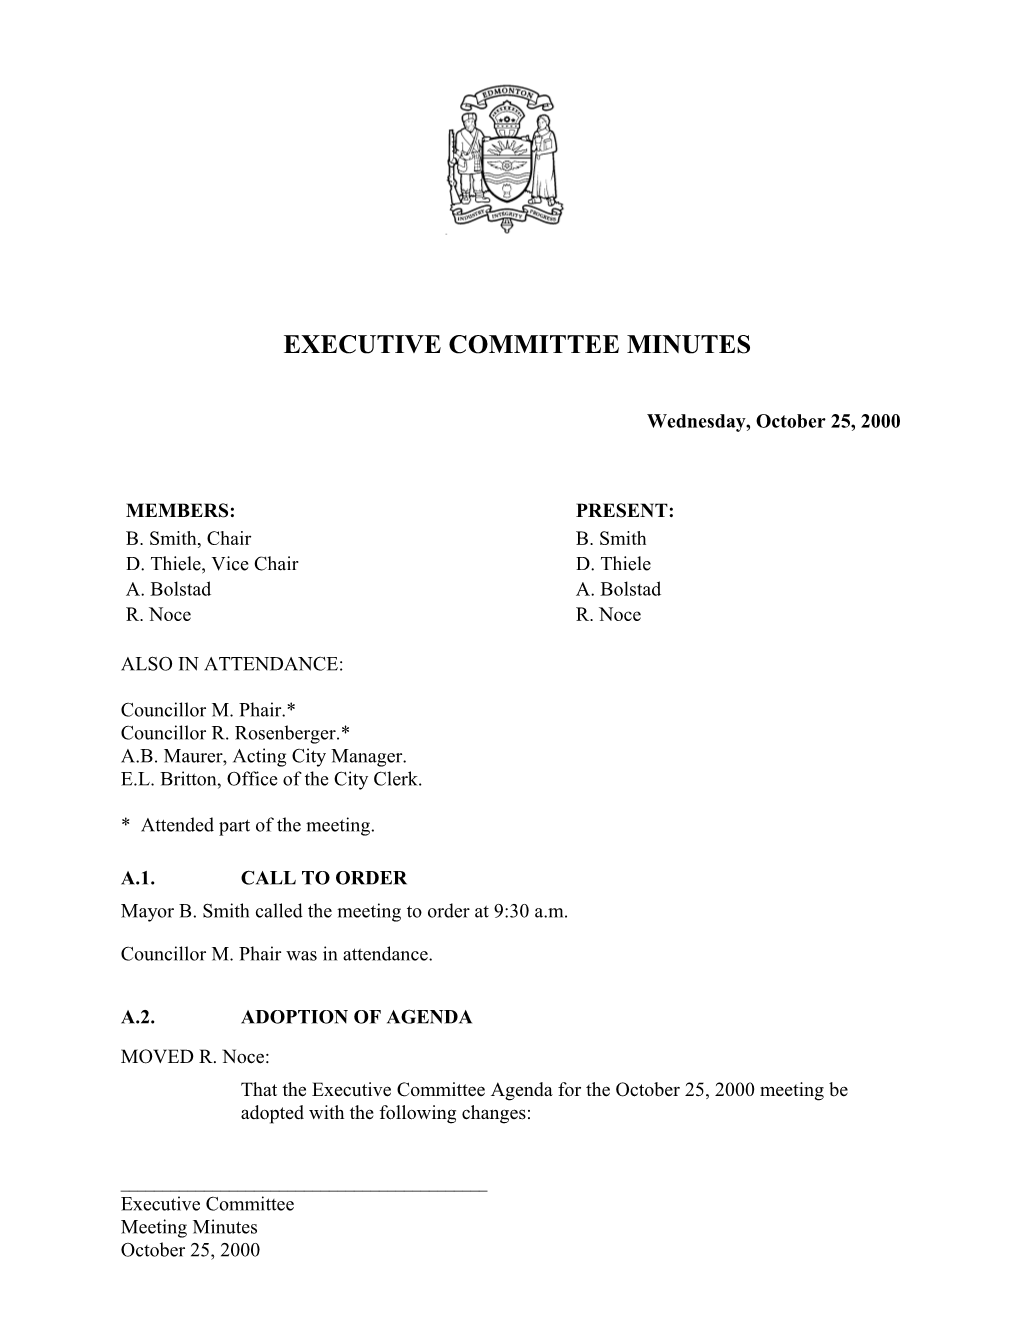 Minutes for Executive Committee October 25, 2000 Meeting